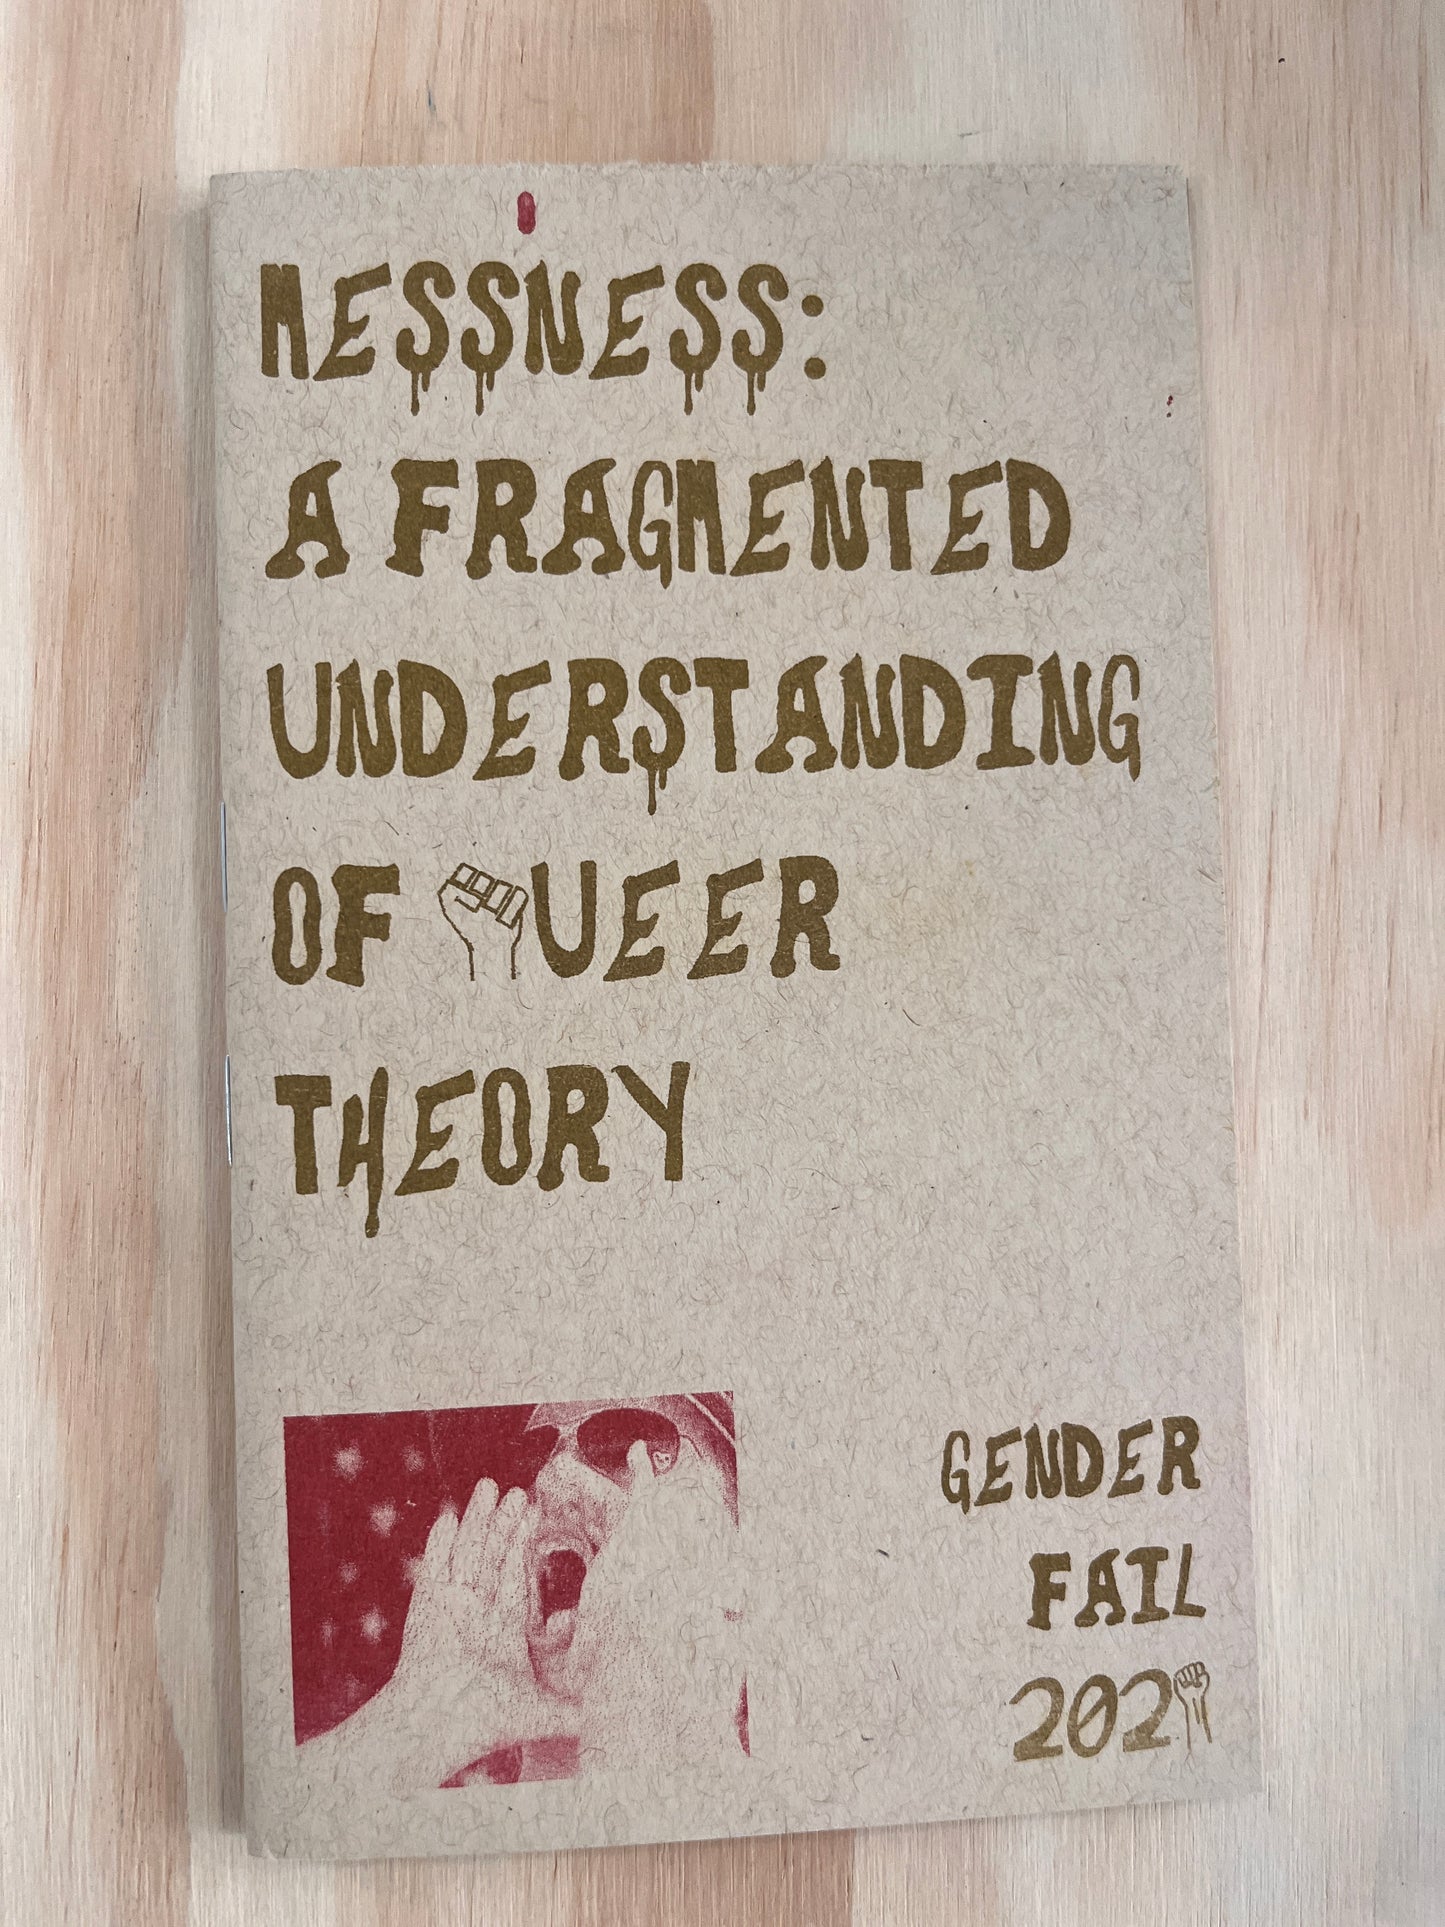 Messiness: A Fragmented Understanding of Queer Theory